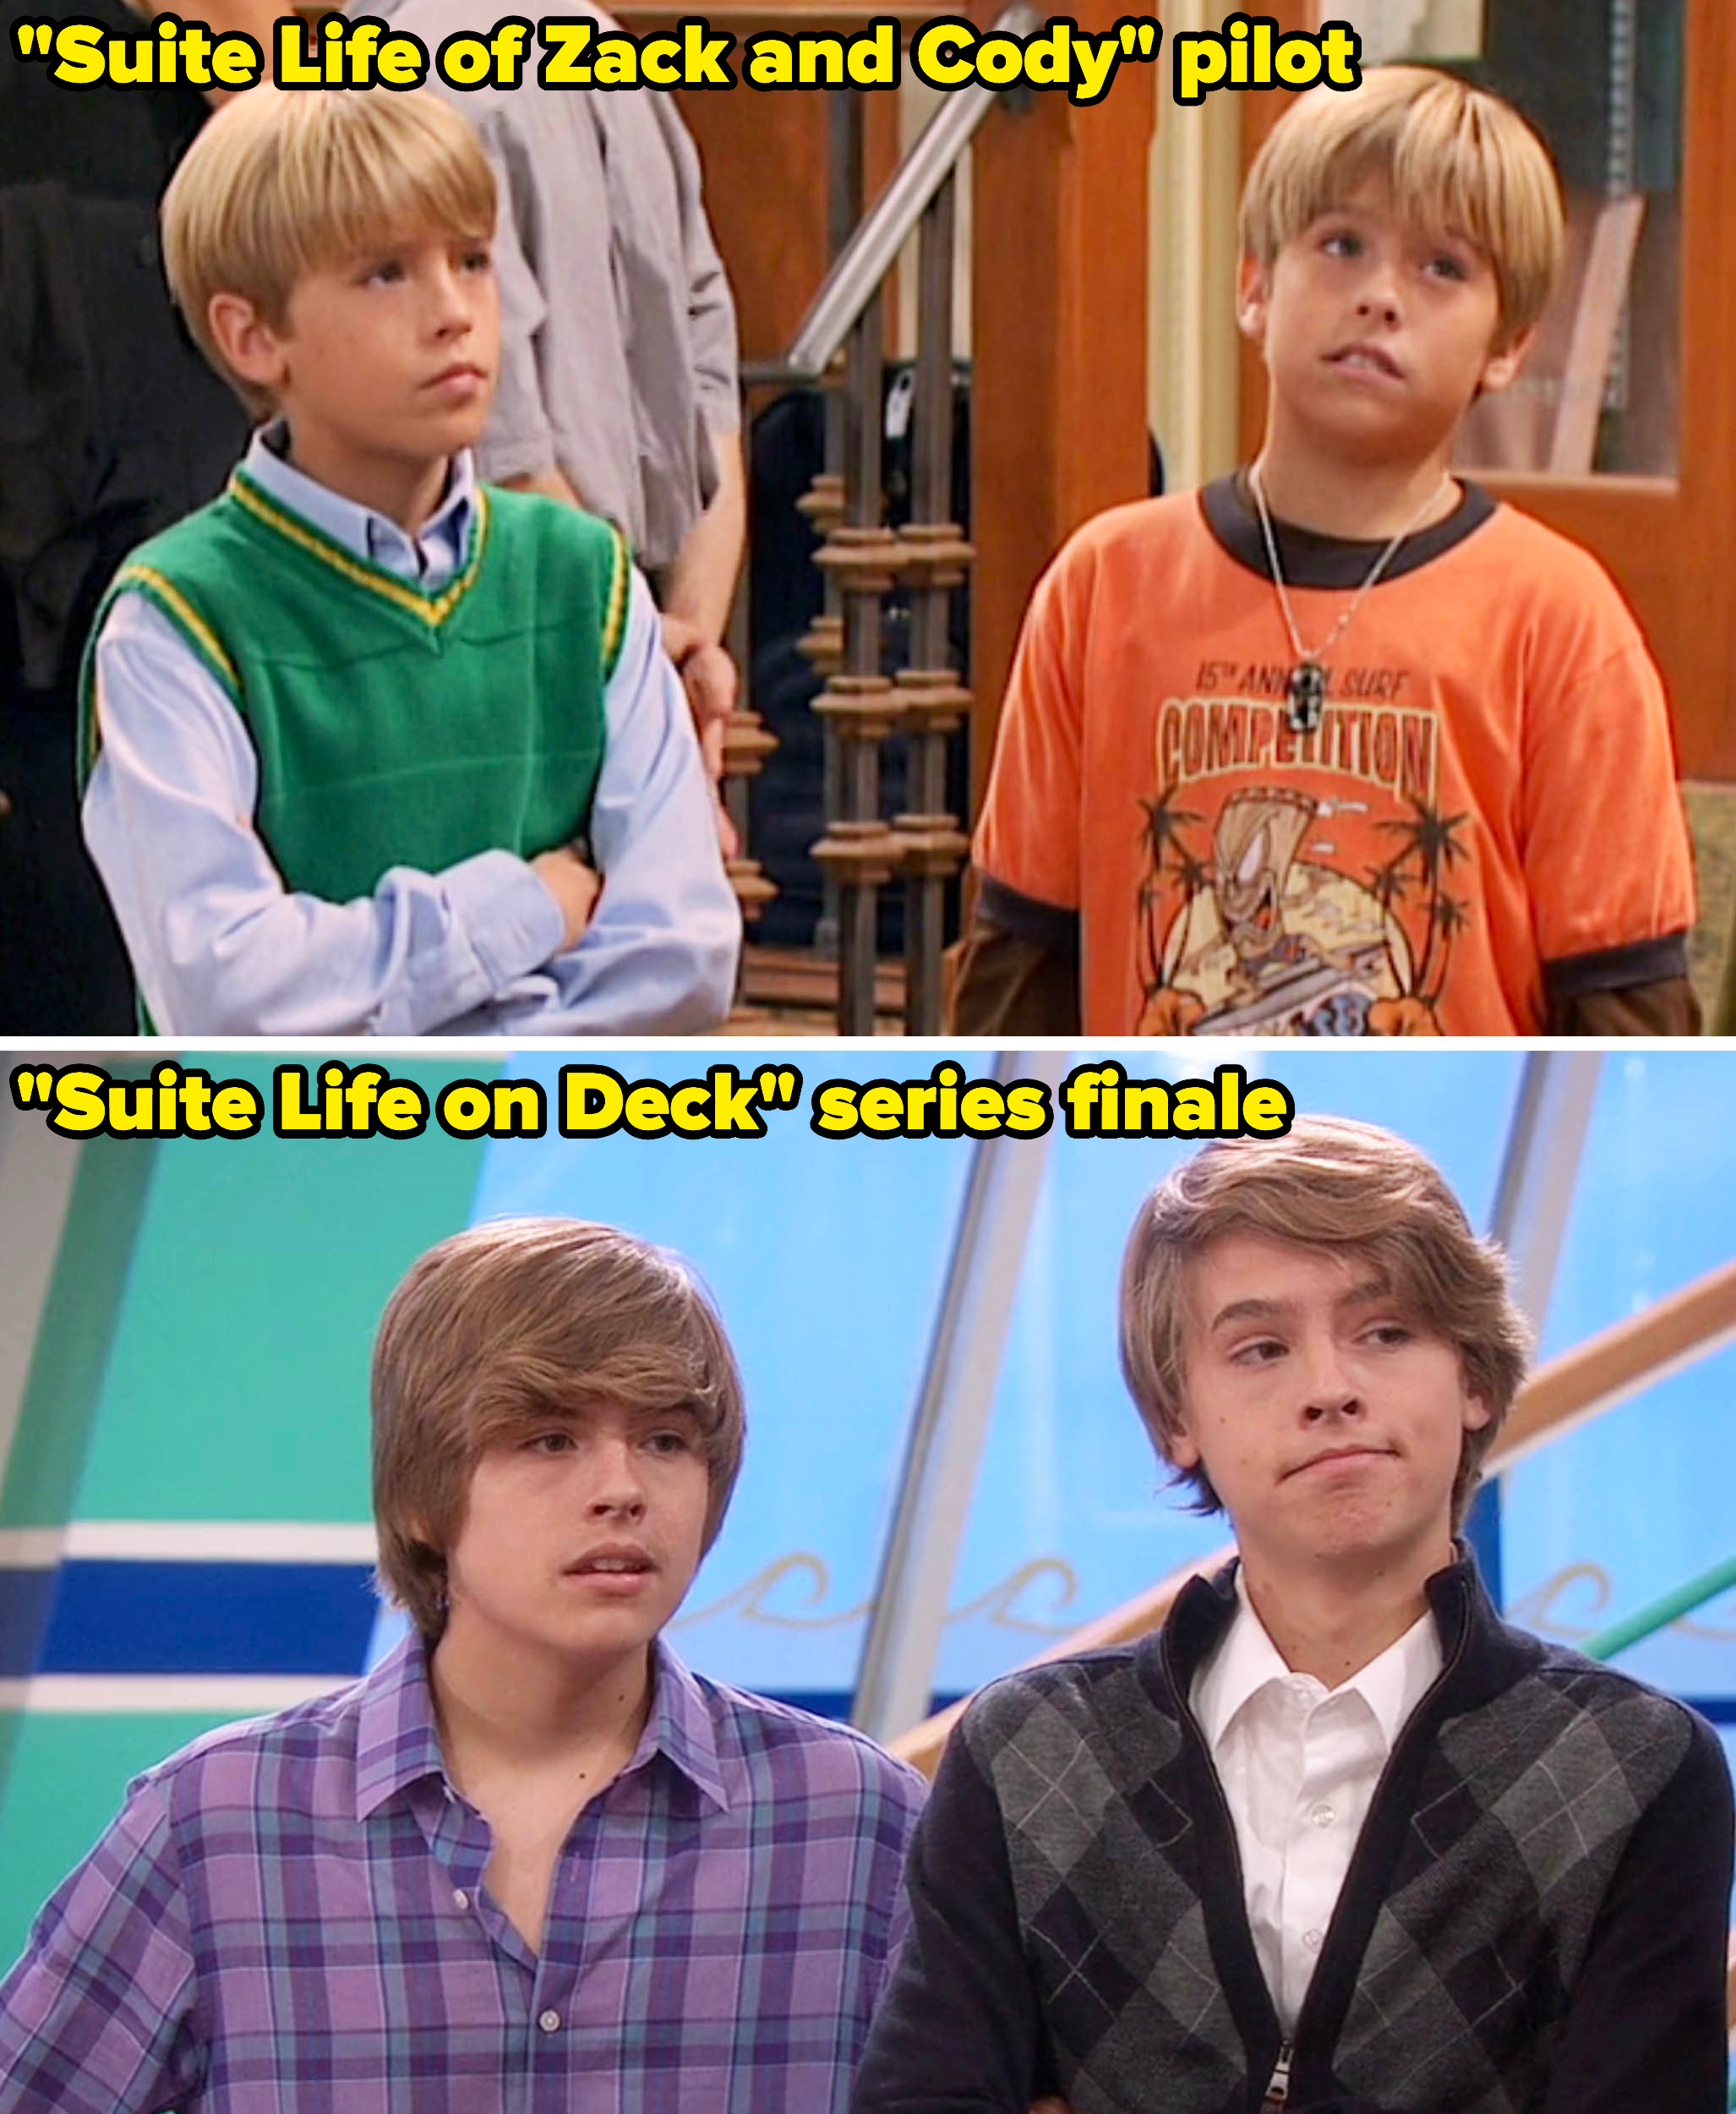 The Sprouse twins in the Suite Life series